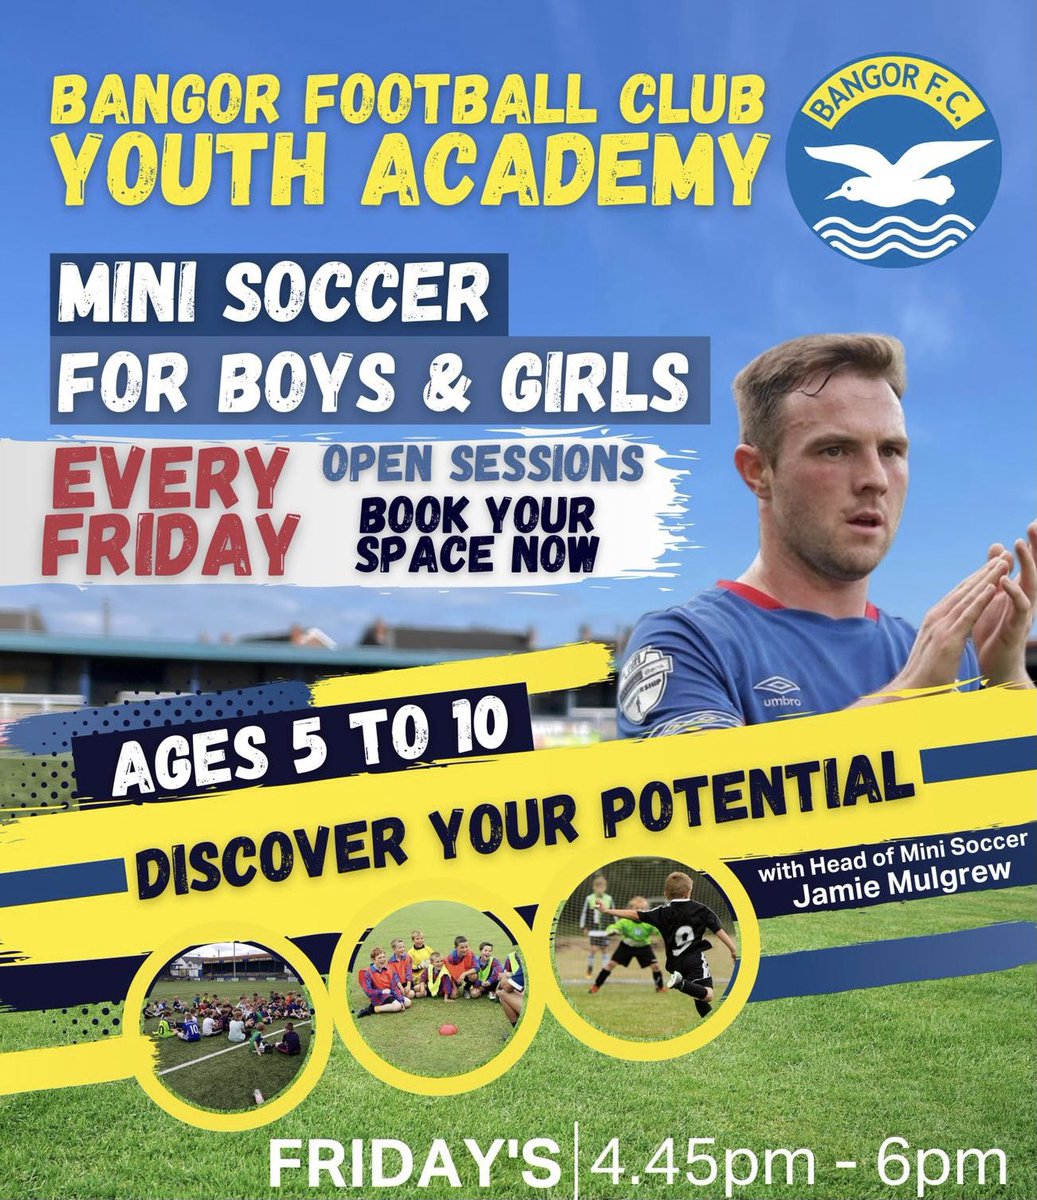 ⚽️ Join us at Clandeboye Park tomorrow evening for Mini Soccer. Sign up here for just £5 using our new booking form for May ⤵️ app.teamfeepay.com/s/tdiB3qDldg 🟡🔵